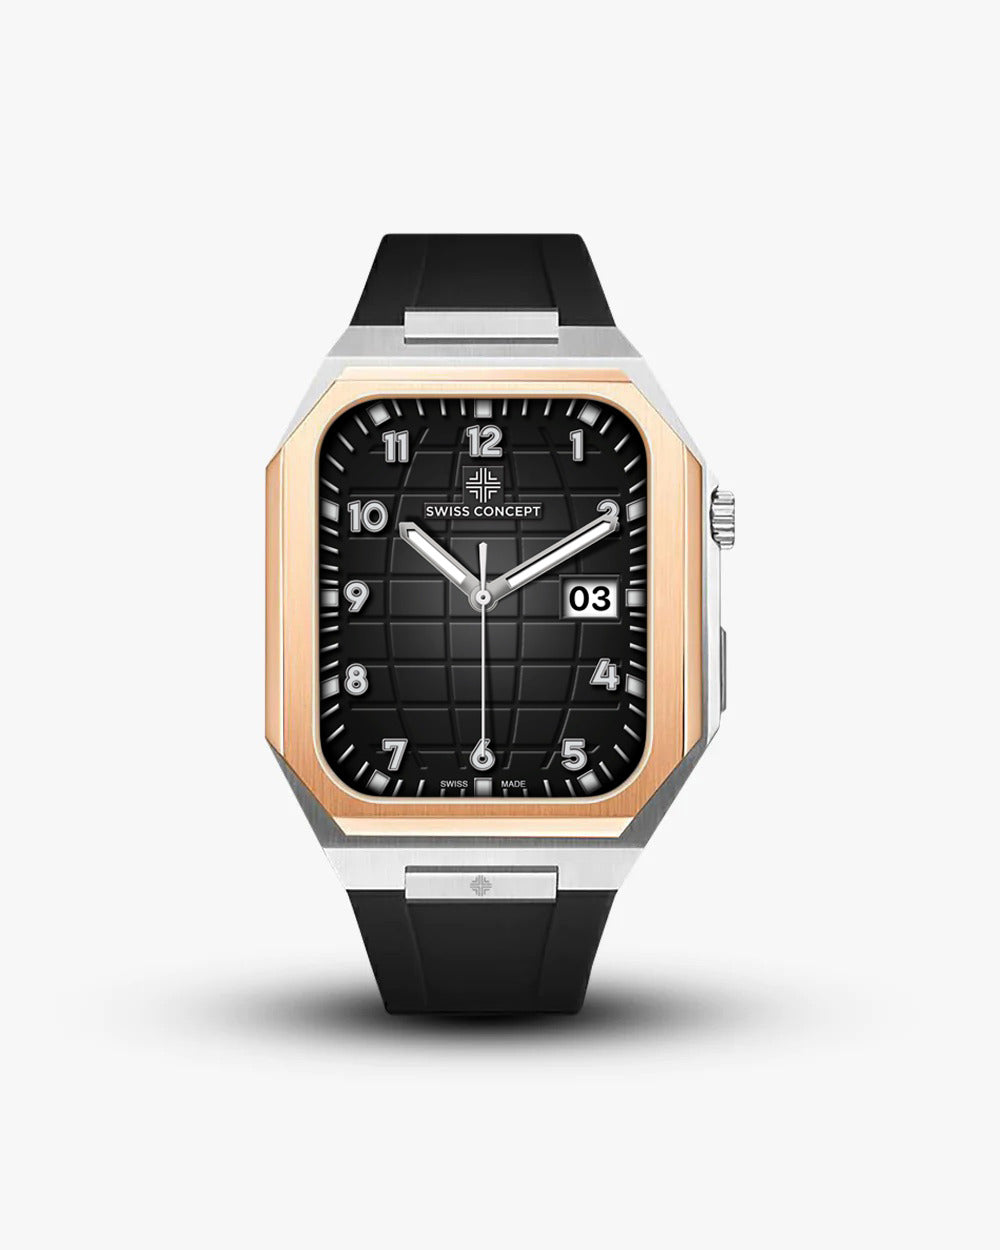 Swiss Concept Nautical Sport Edition Stainless Steel & Rose Gold Apple Watch Case - Swiss Design